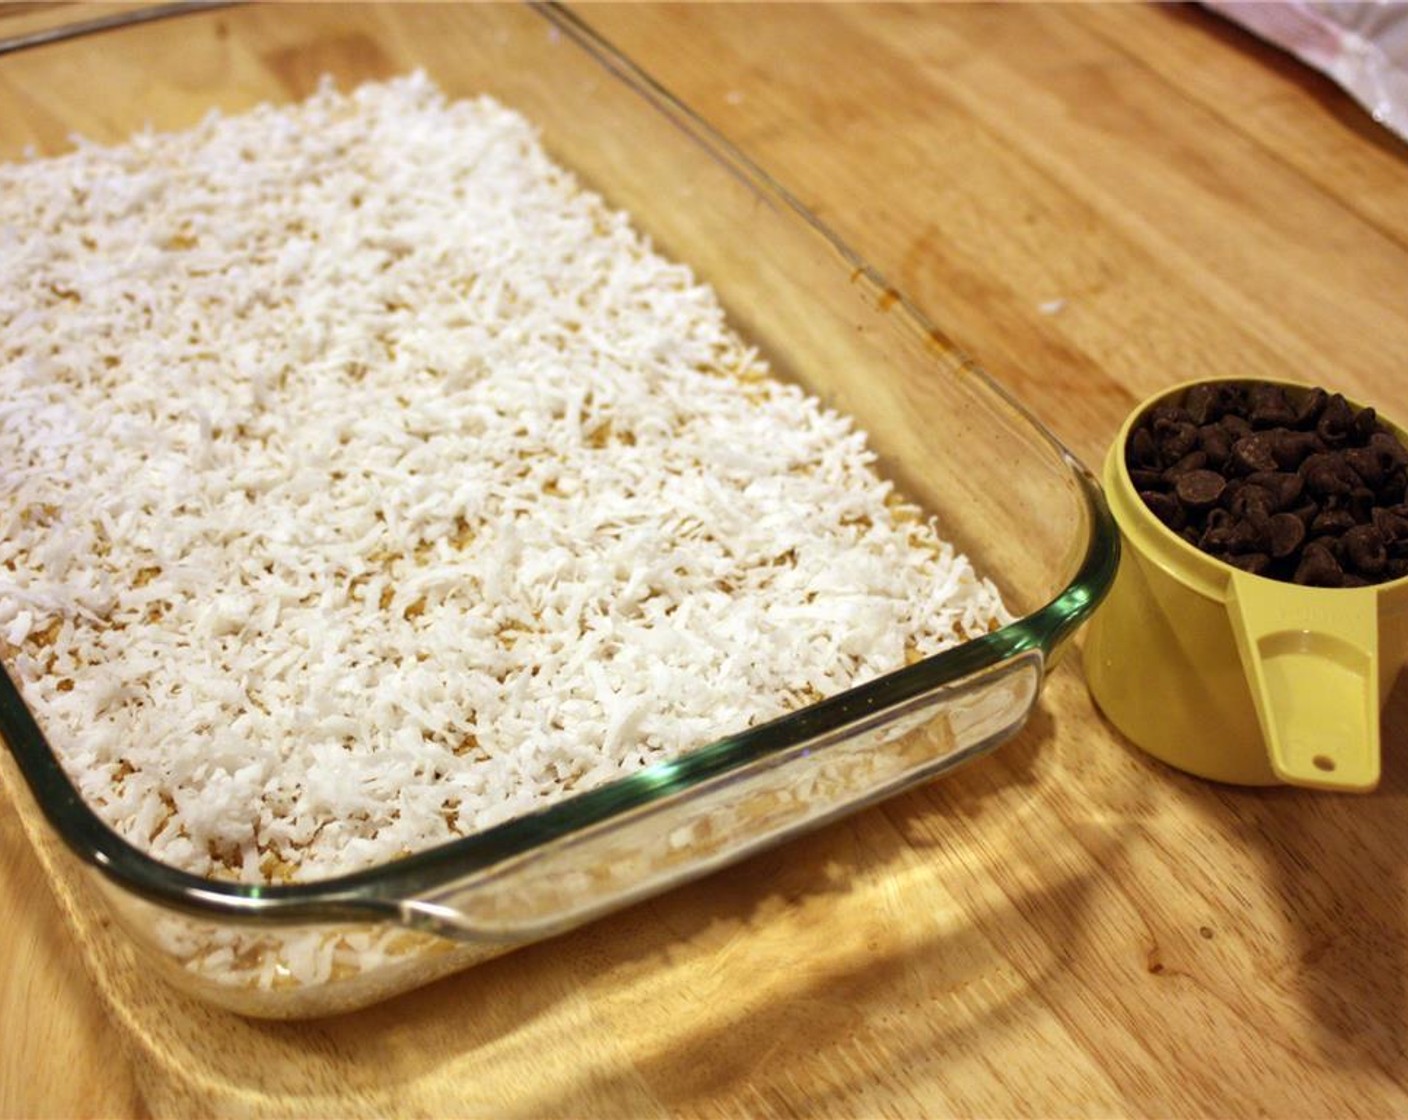 step 7 Next, sprinkle on the Sweetened Coconut Flakes (1 1/3 cups) evenly over the top of the walnuts.